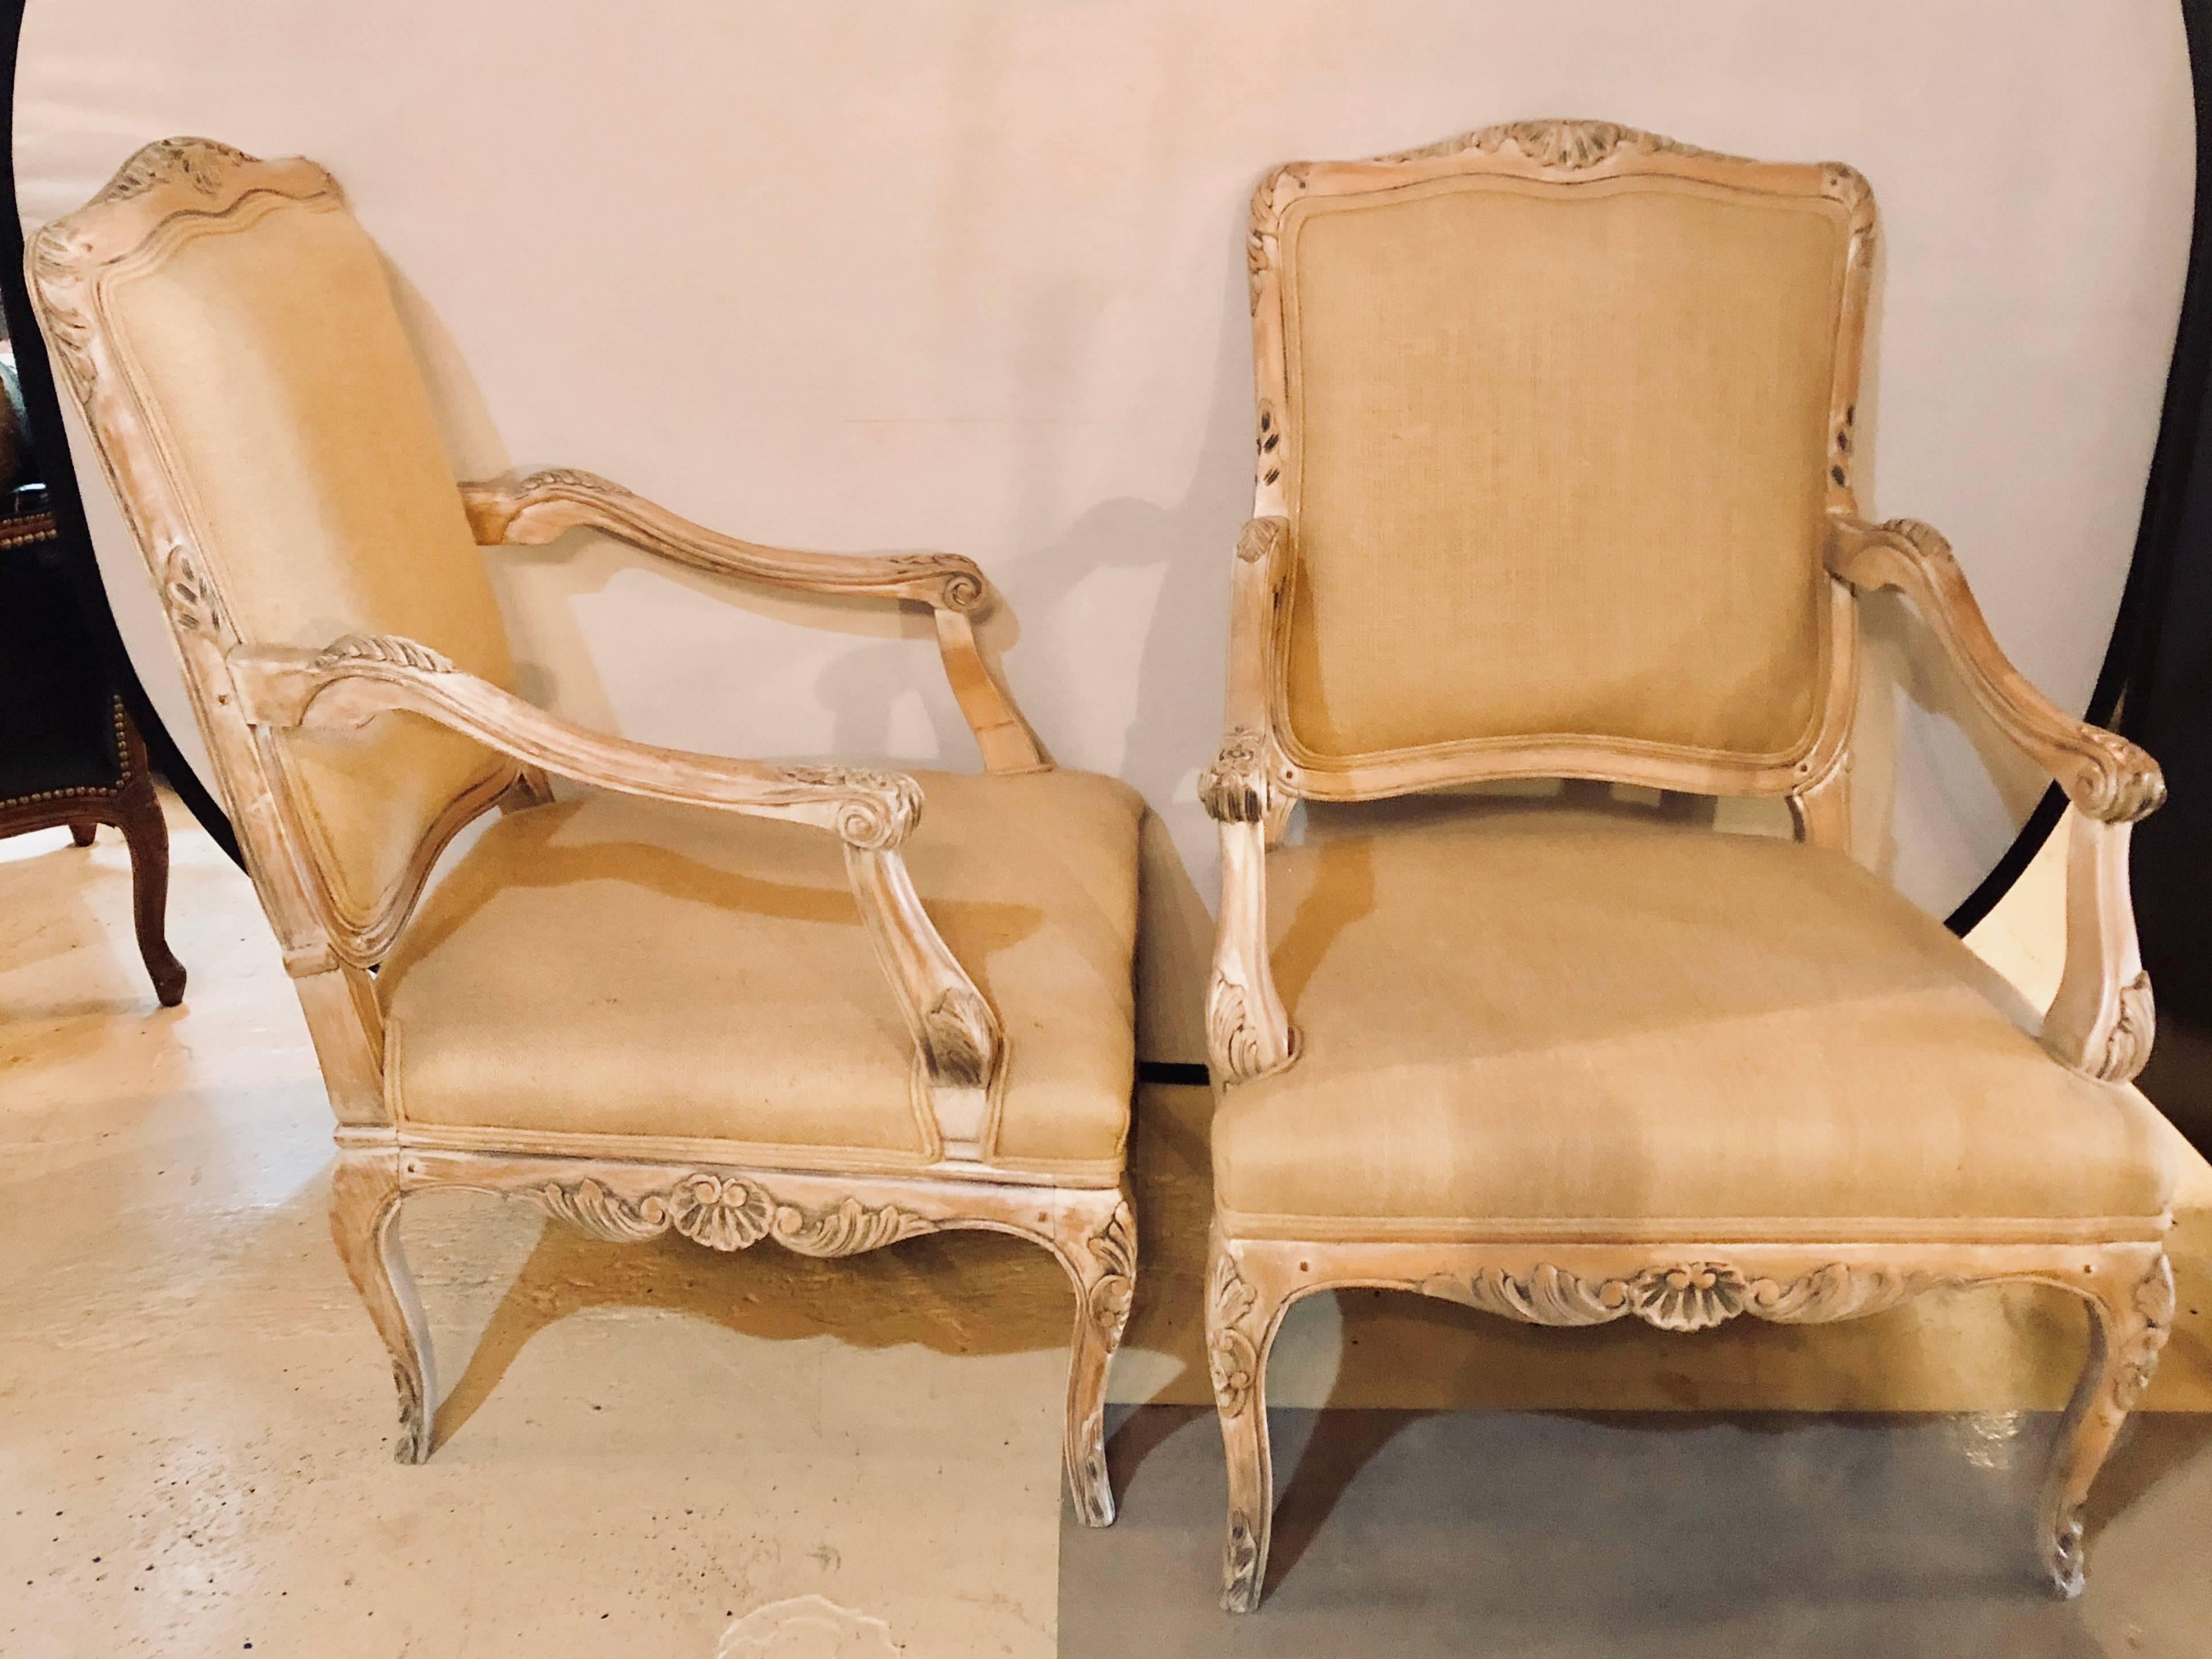 A pair of French pin construction burlap armchairs or fauteuil chairs. This fine pair of chairs have a washed distressed finish with new burlap upholstery. Each frame having pin construction.